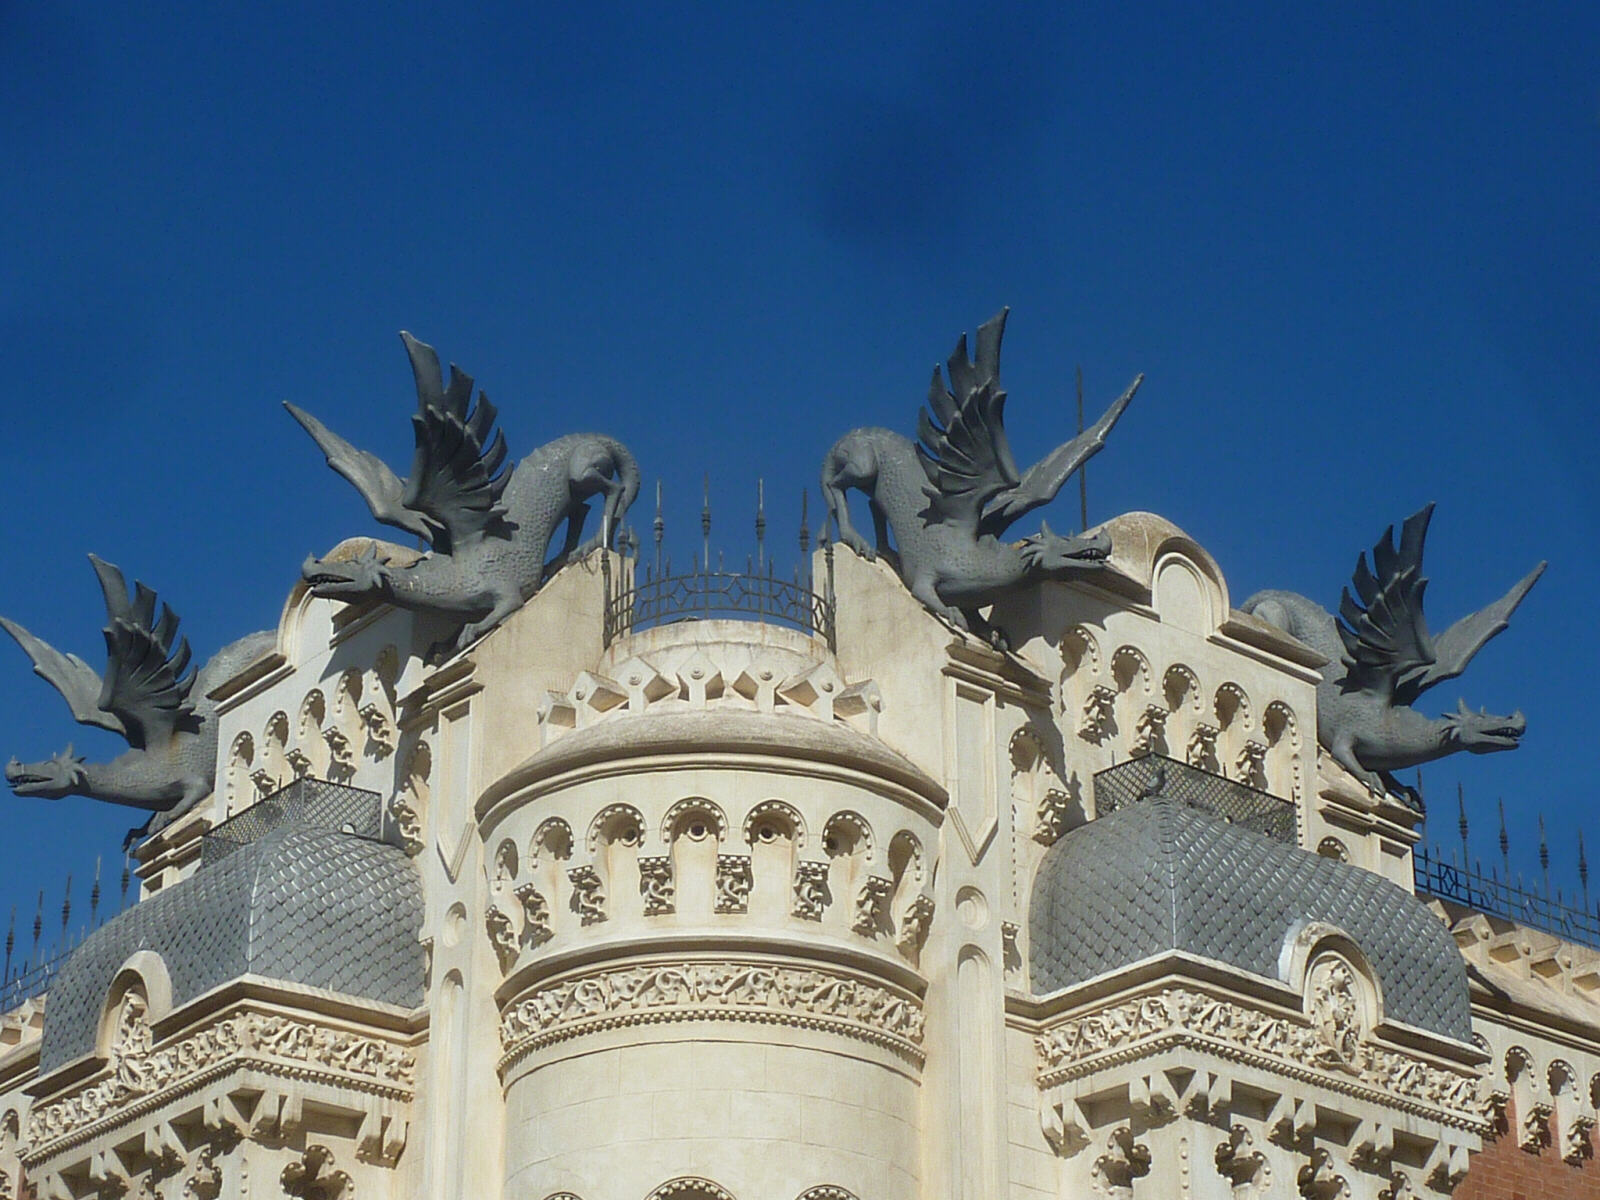 The Dragon House on the main street in Ceuta, Spain